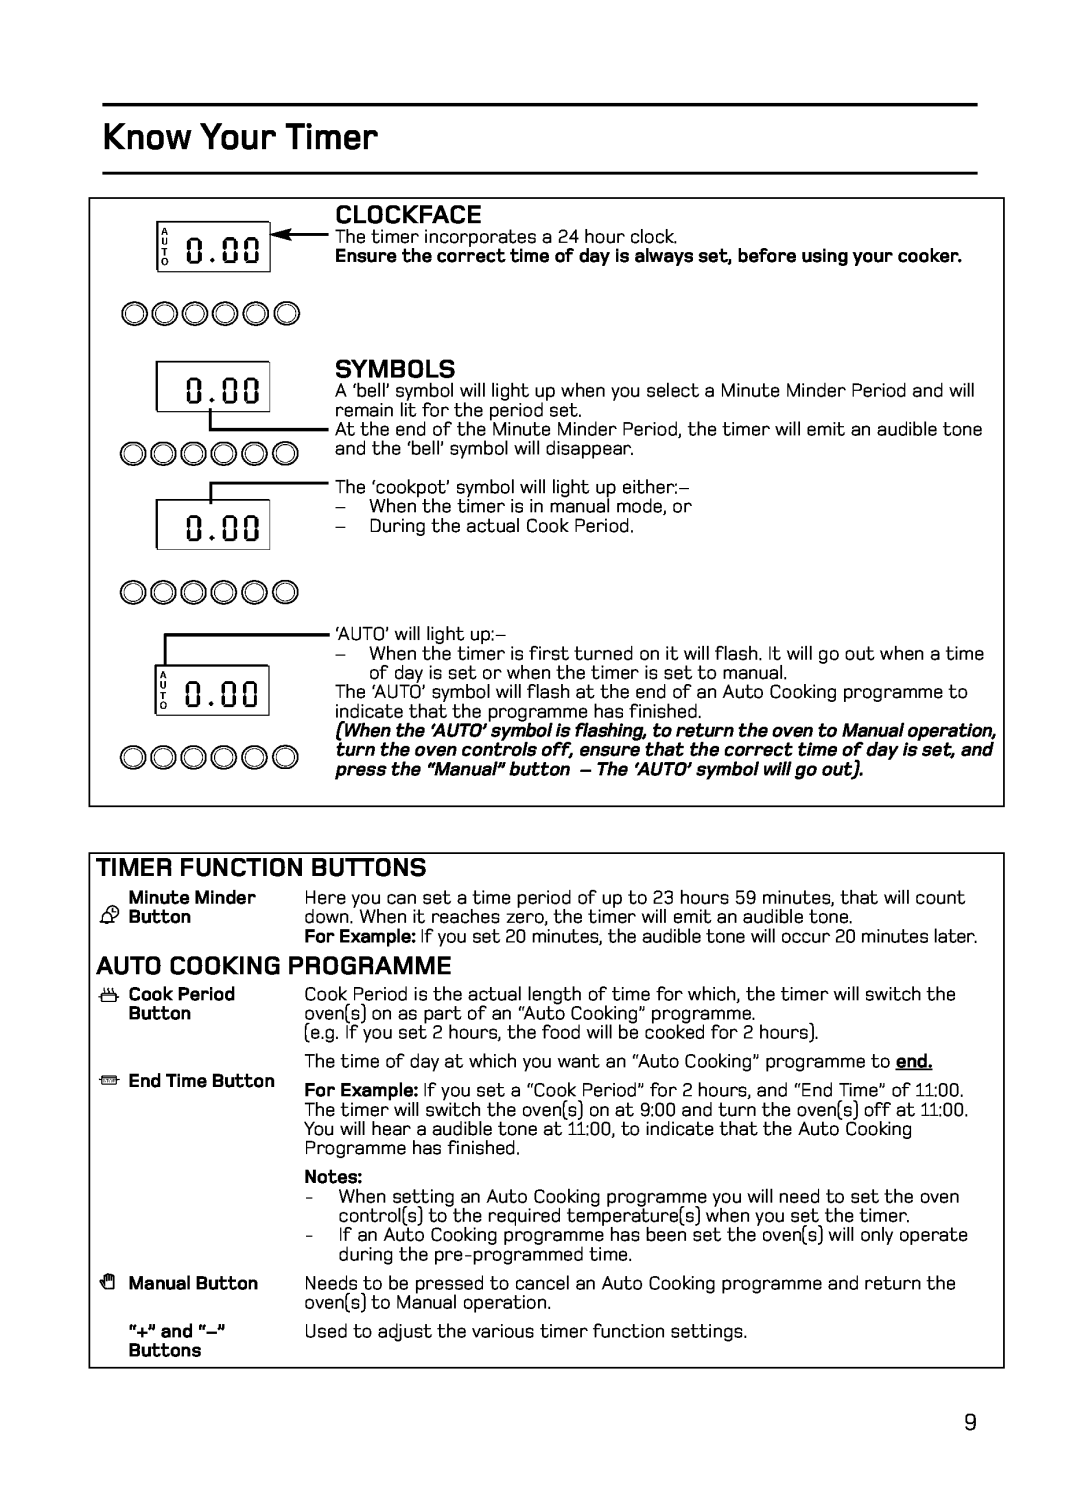 Hotpoint S130E Mk2 manual Know Your Timer, Clockface, Symbols, Timer Function Buttons, Auto Cooking Programme, Cook Period 